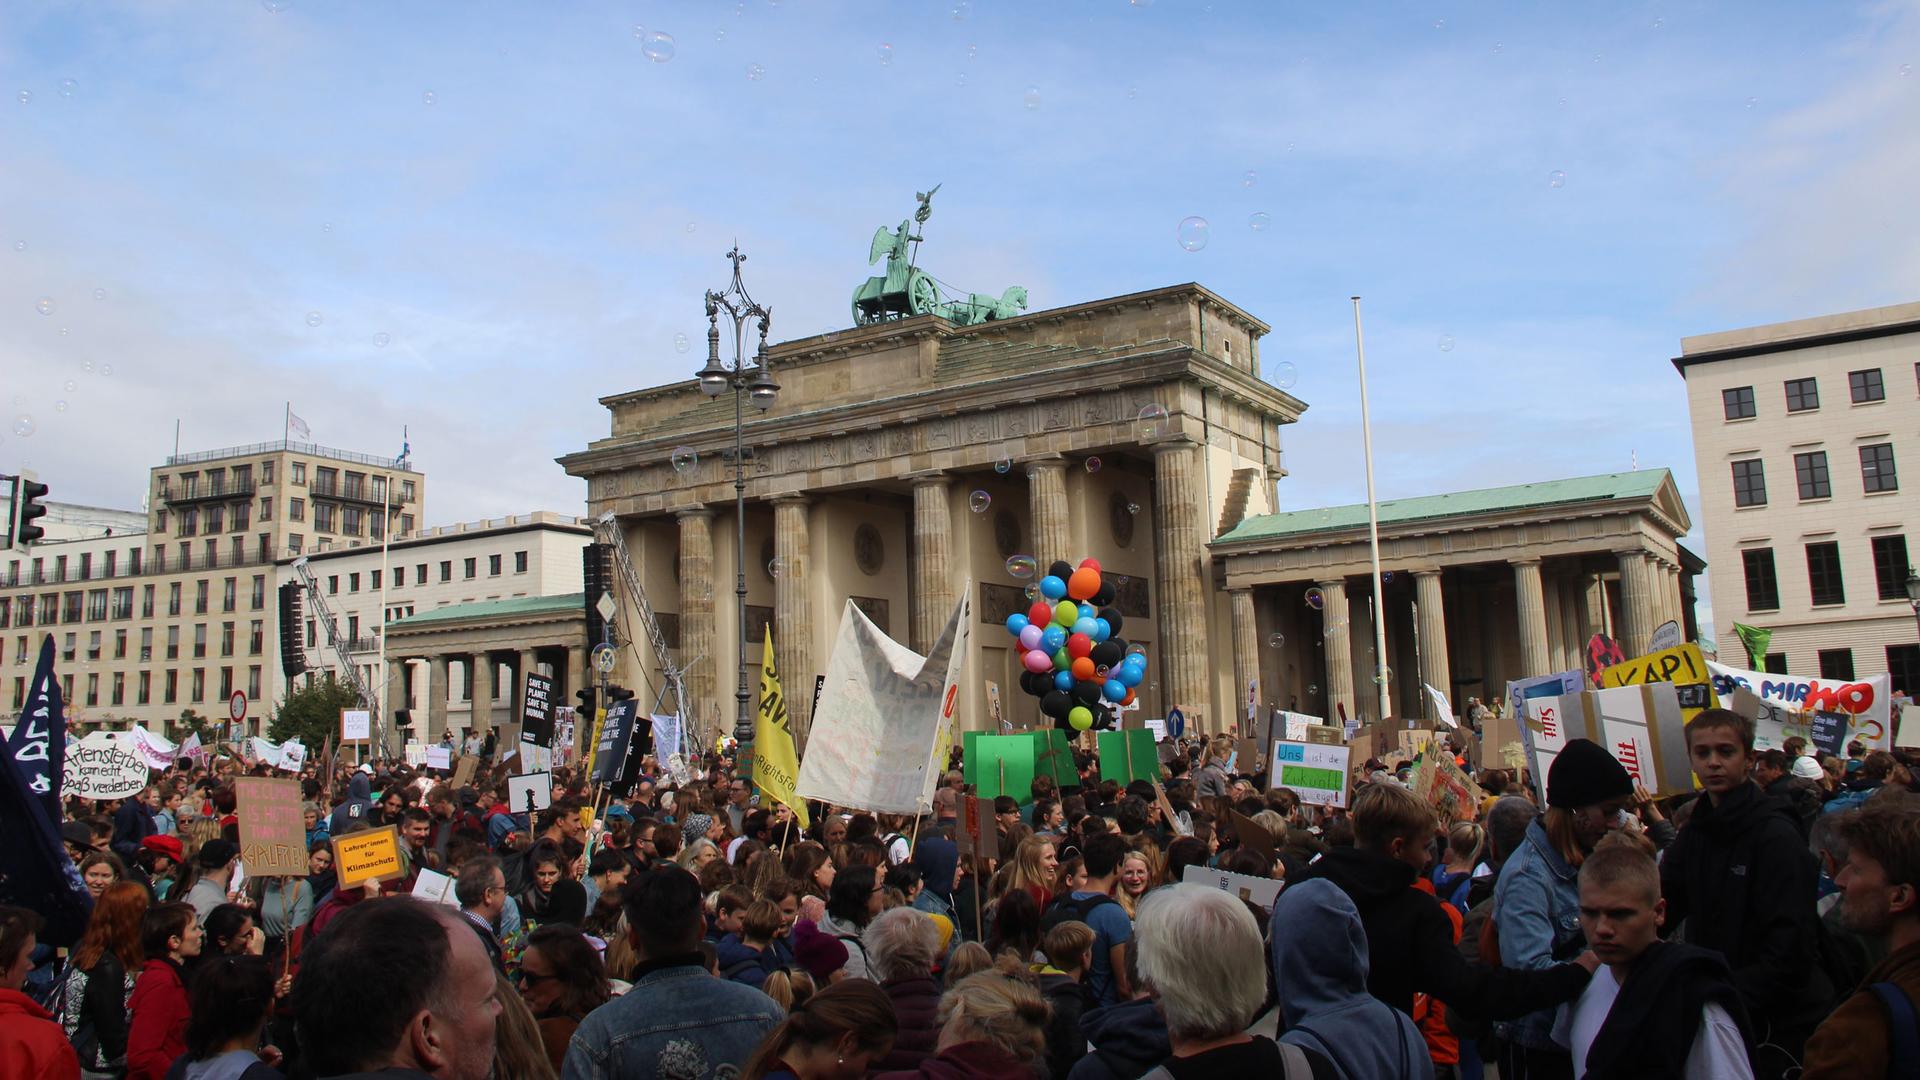 An estimated 100,000 people turned out for the climate strike in Berlin on Sept. 20, 2019. 